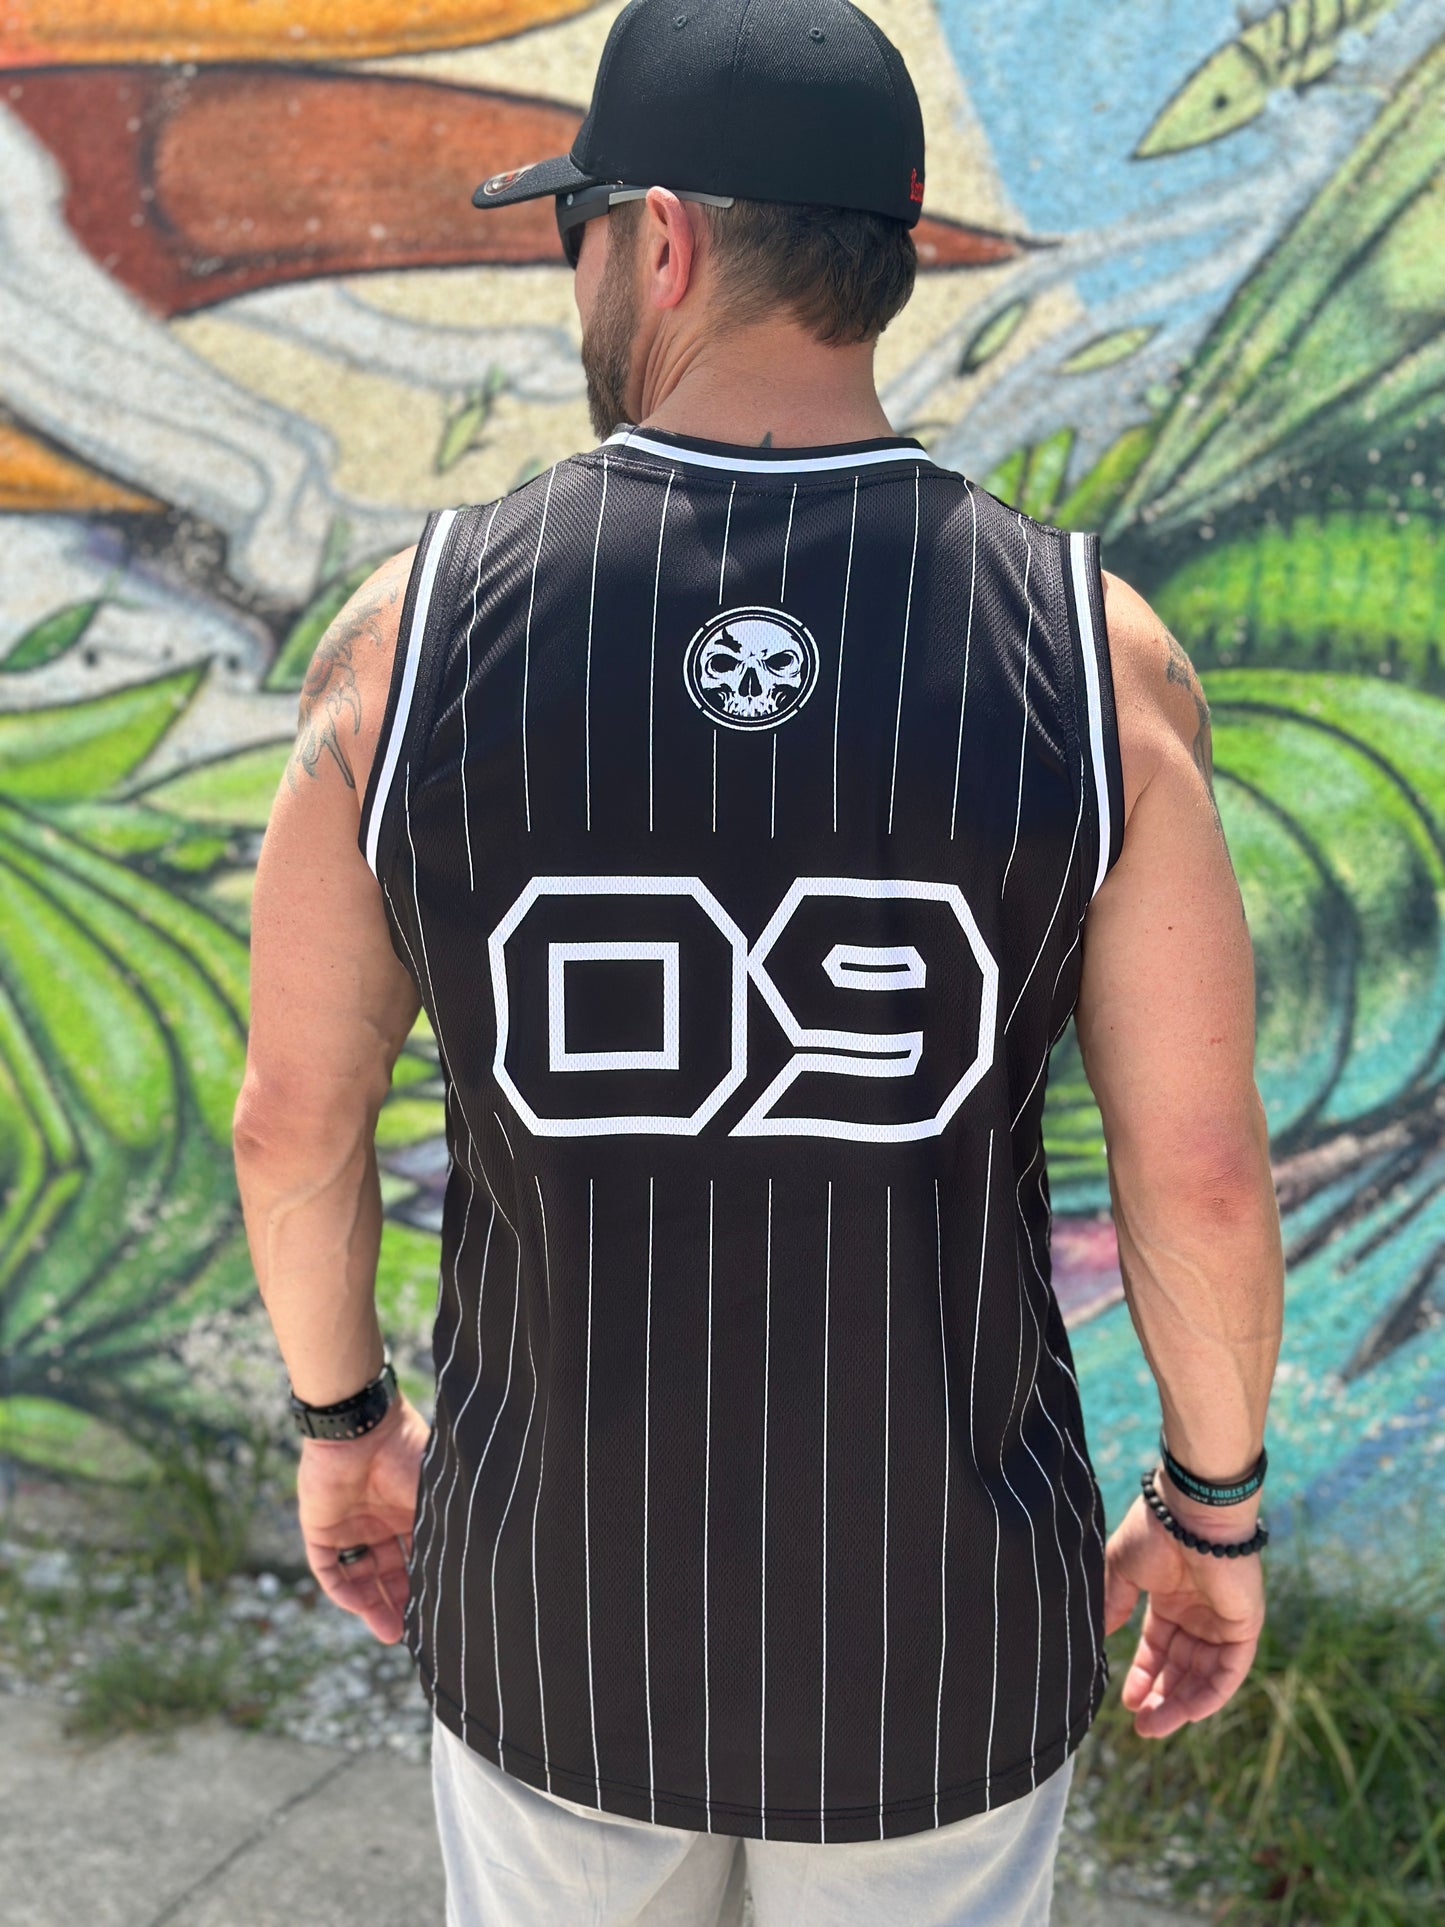 NOW AVAILABLE!  Men's Black "09" Jersey - White Pinstripes